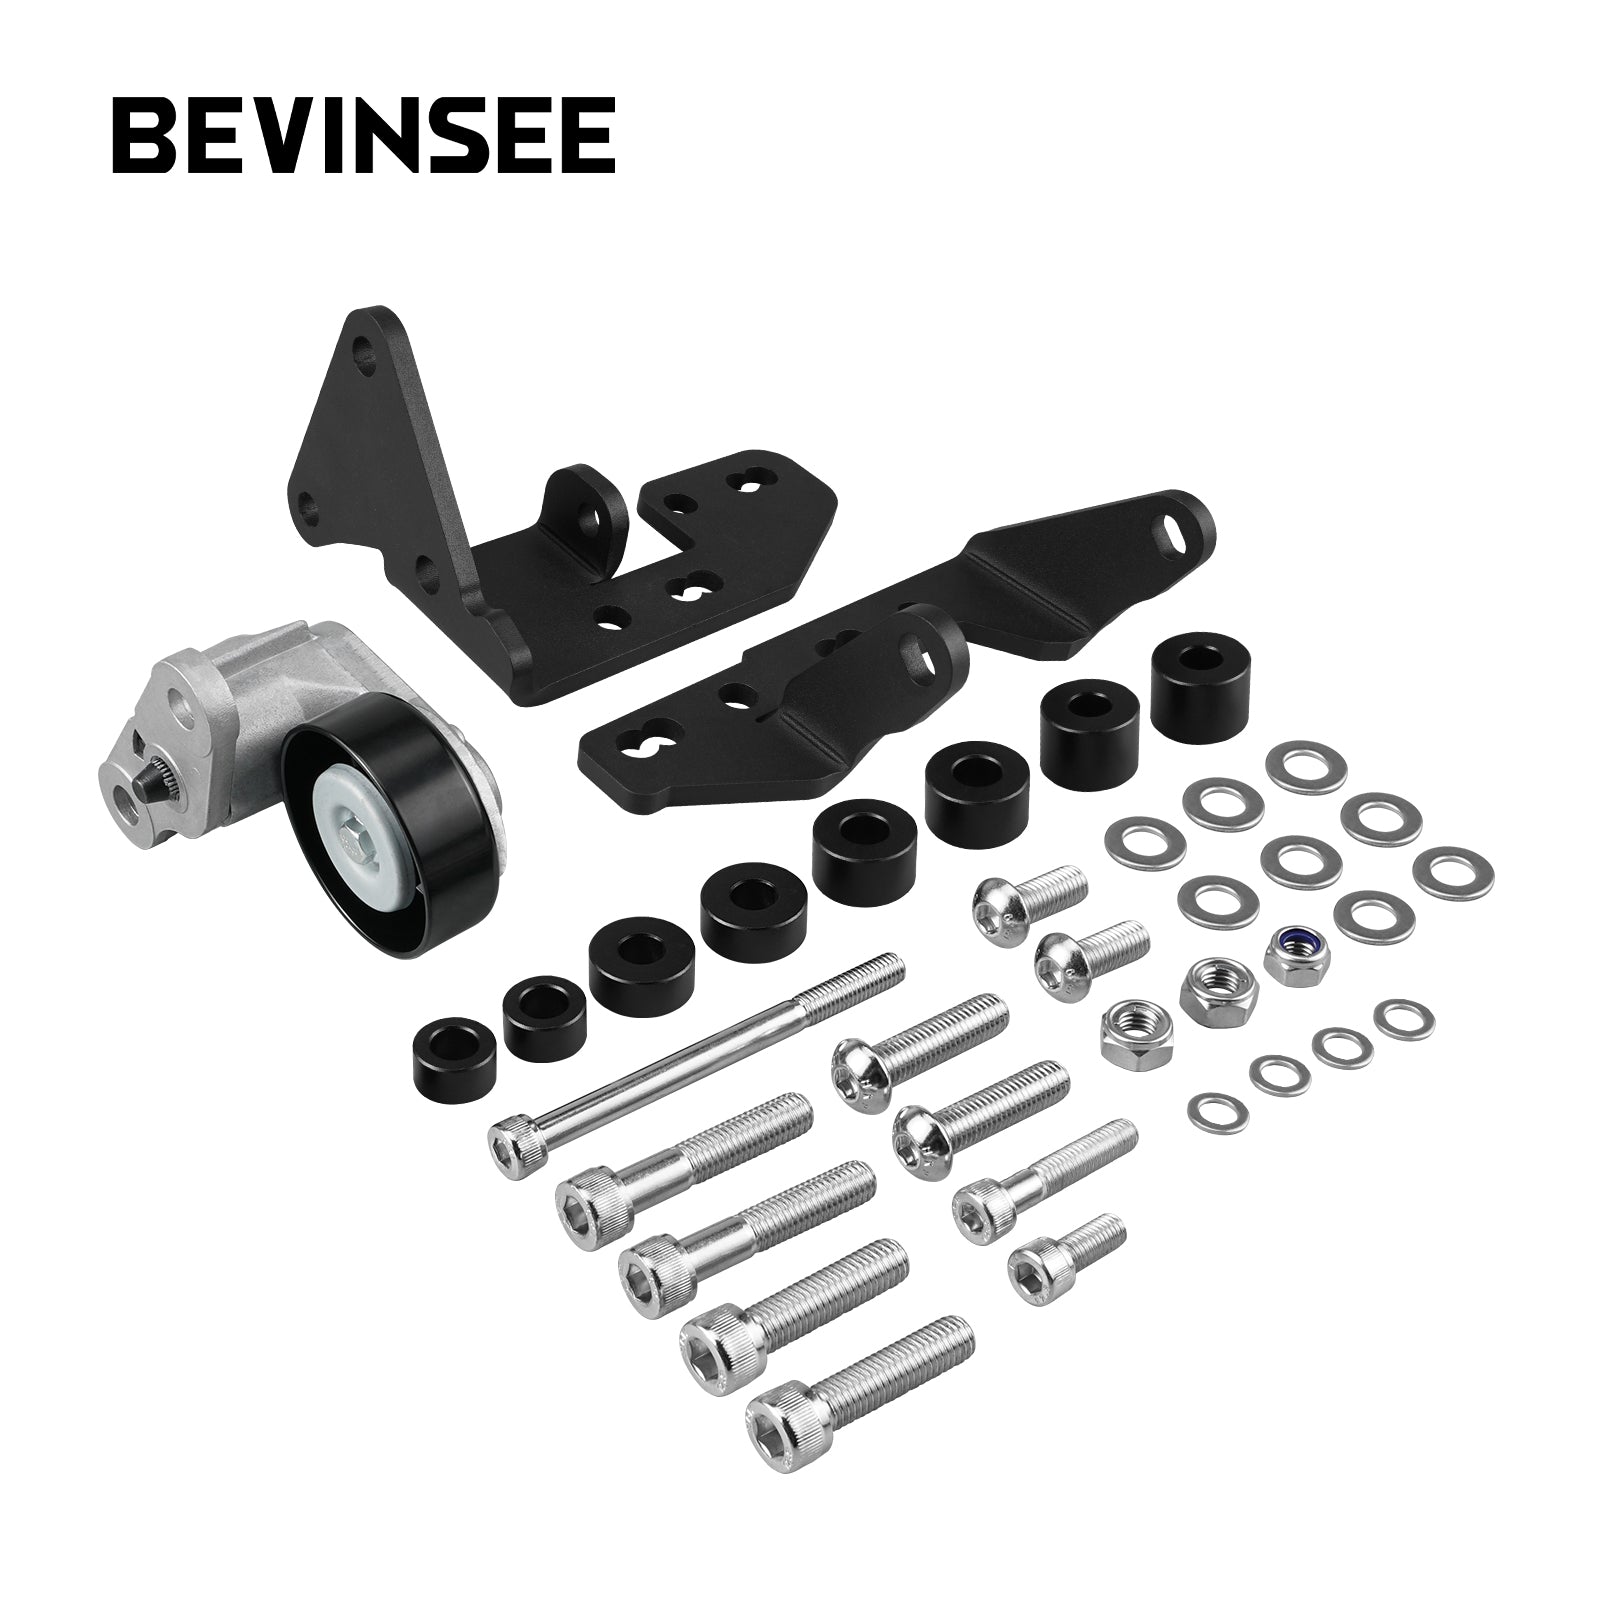 BEVINSEE Pass Side Low Mount Sanden SD7B10 AC Bracket for LS Truck/SUV Engine 1999-2013